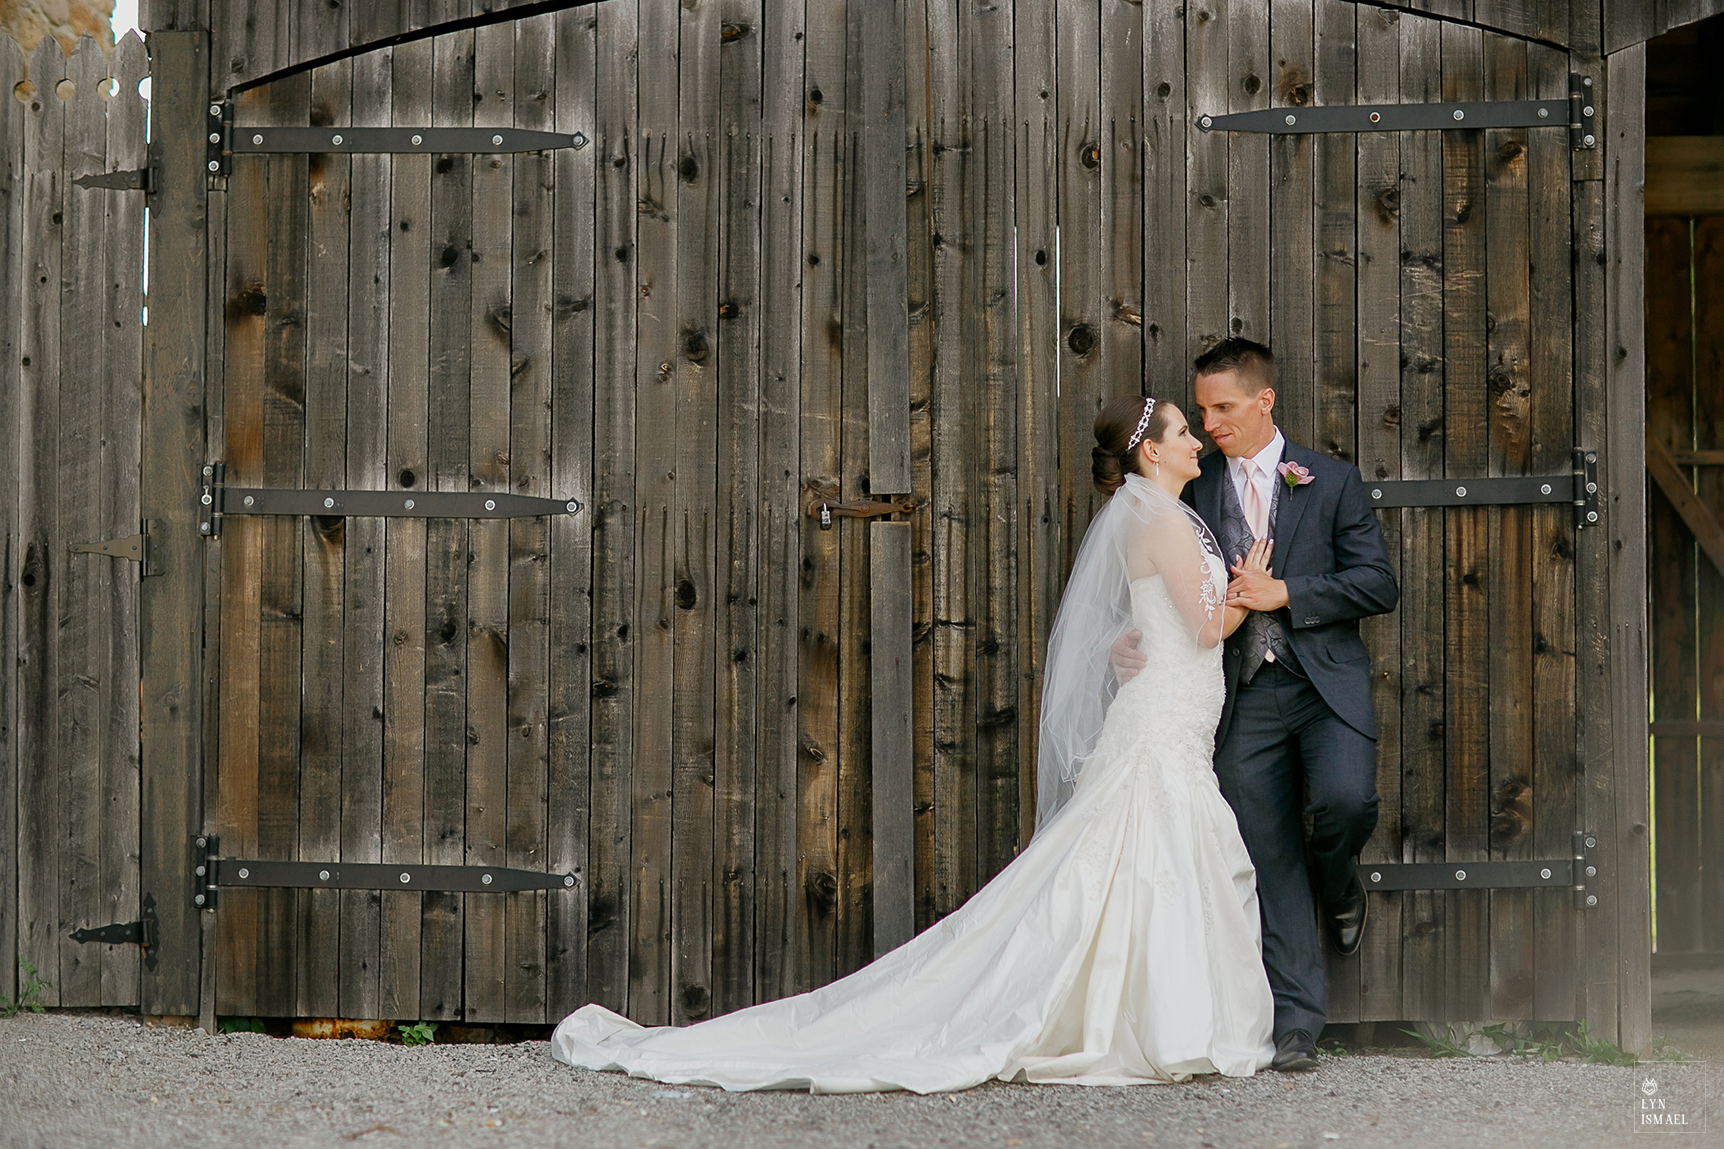 A couple poses in front of the barn located at Dundurn Castle in Hamilton, Ontario.